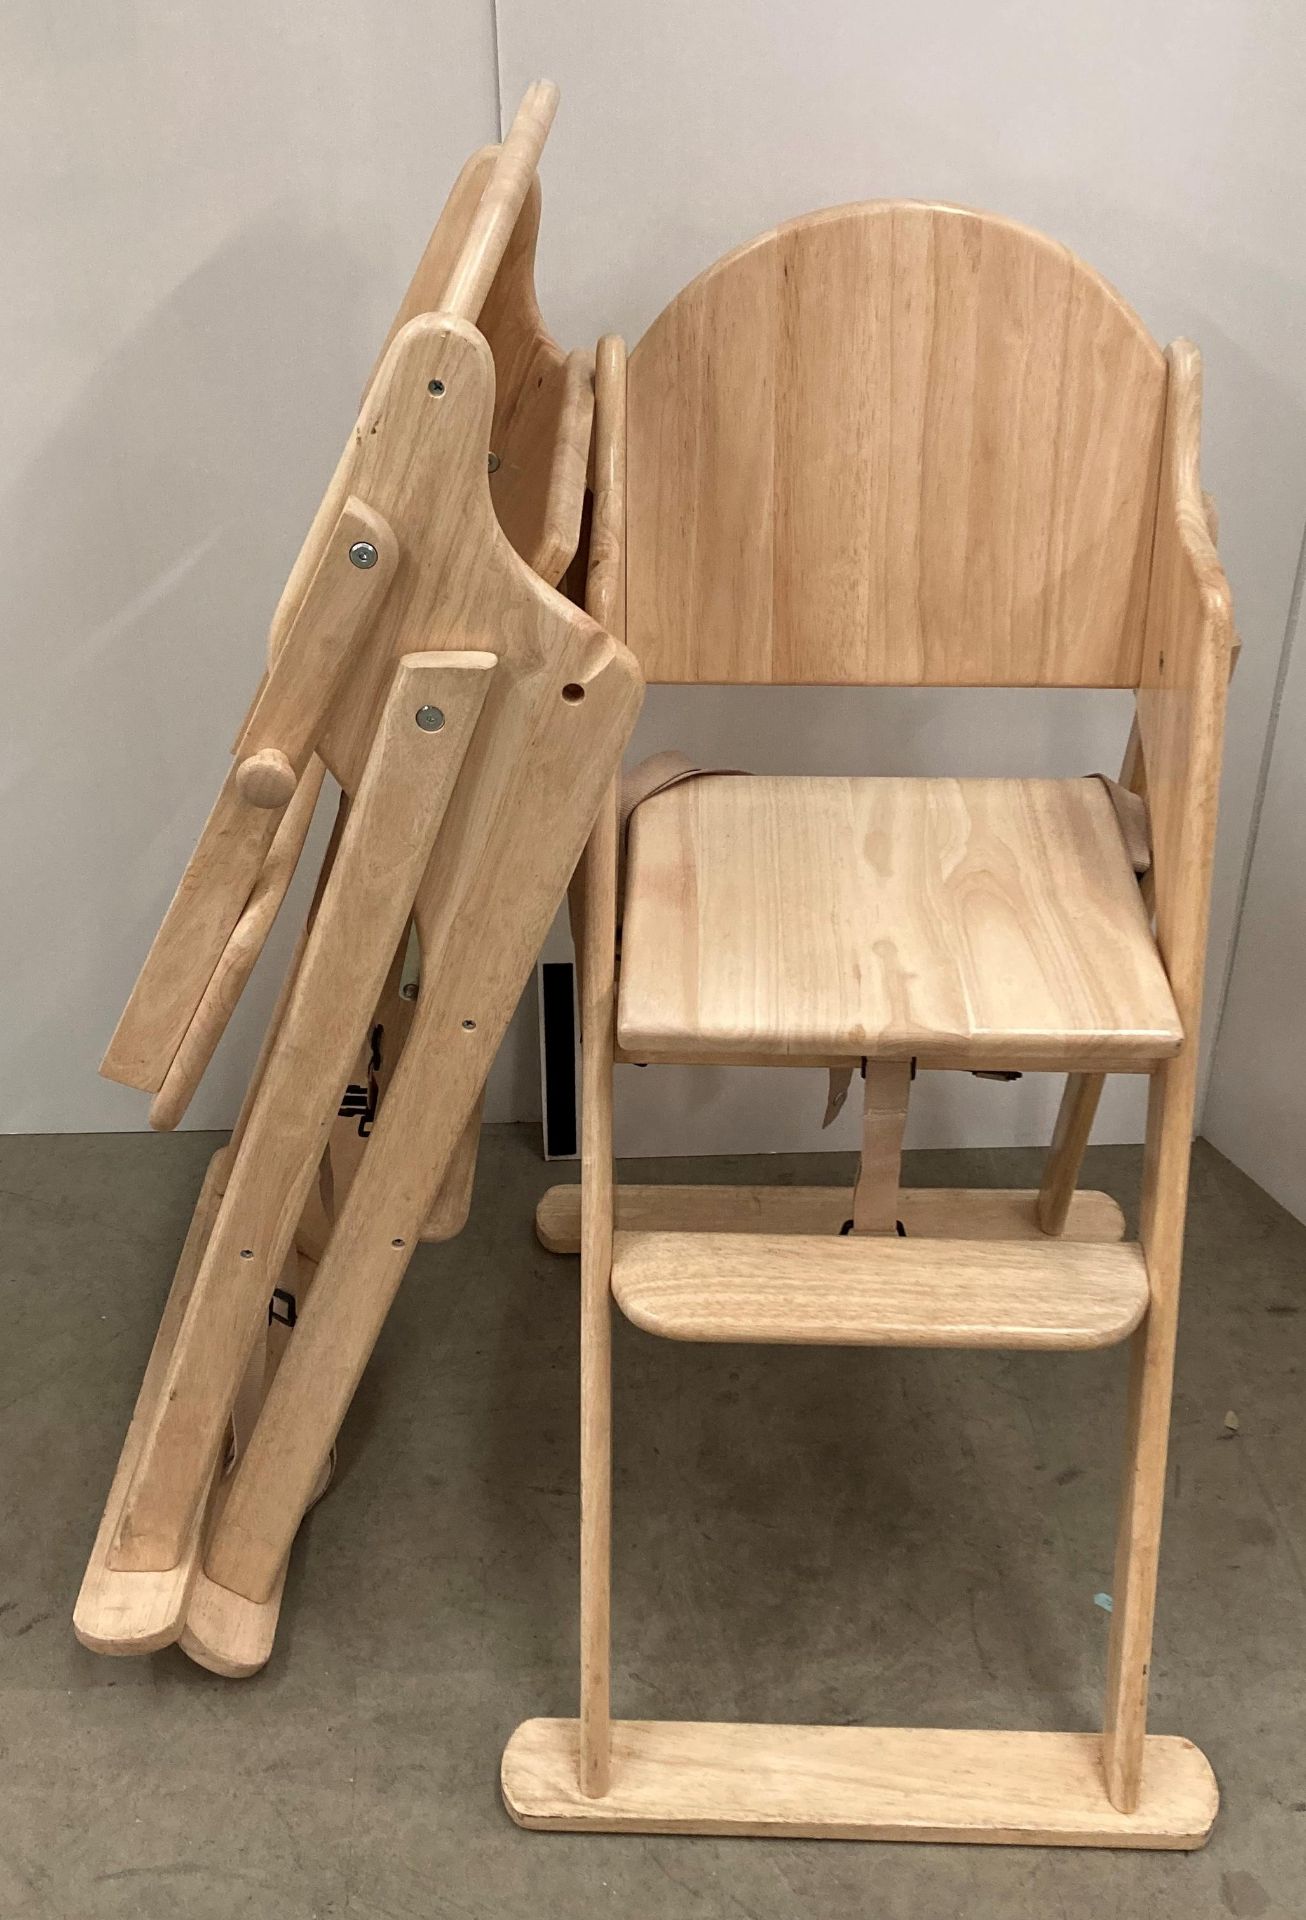 2 x Safetots beech children's safety foldable high chairs (saleroom location: QD06)